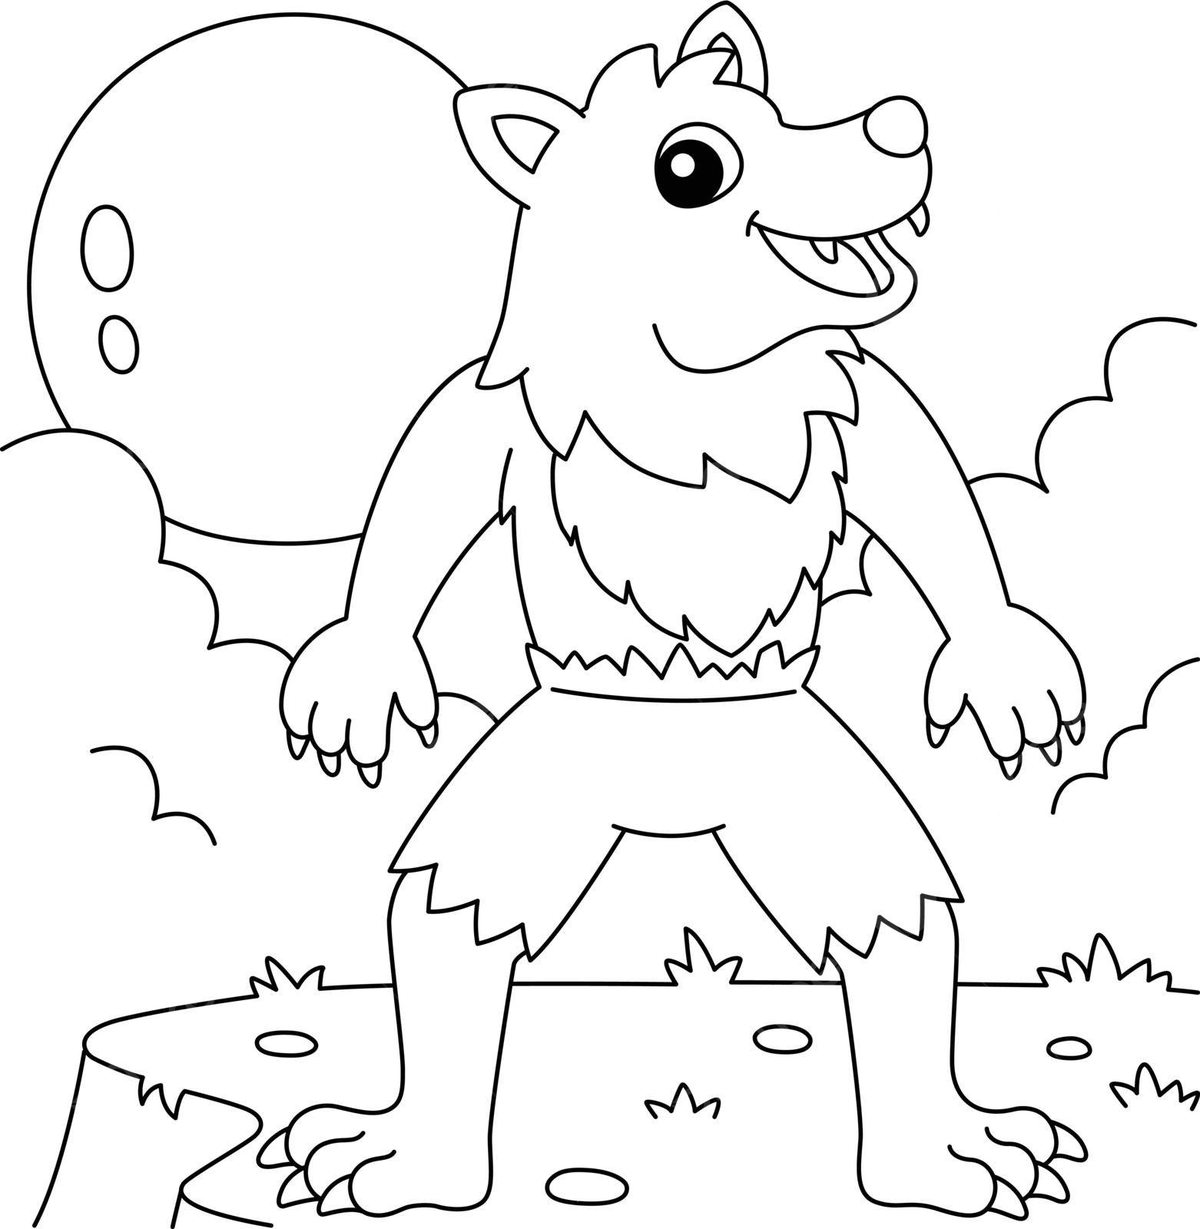 Werewolf halloween coloring page for kids creature vector kids vector wolf drawing halloween drawing ring drawing png and vector with transparent background for free download